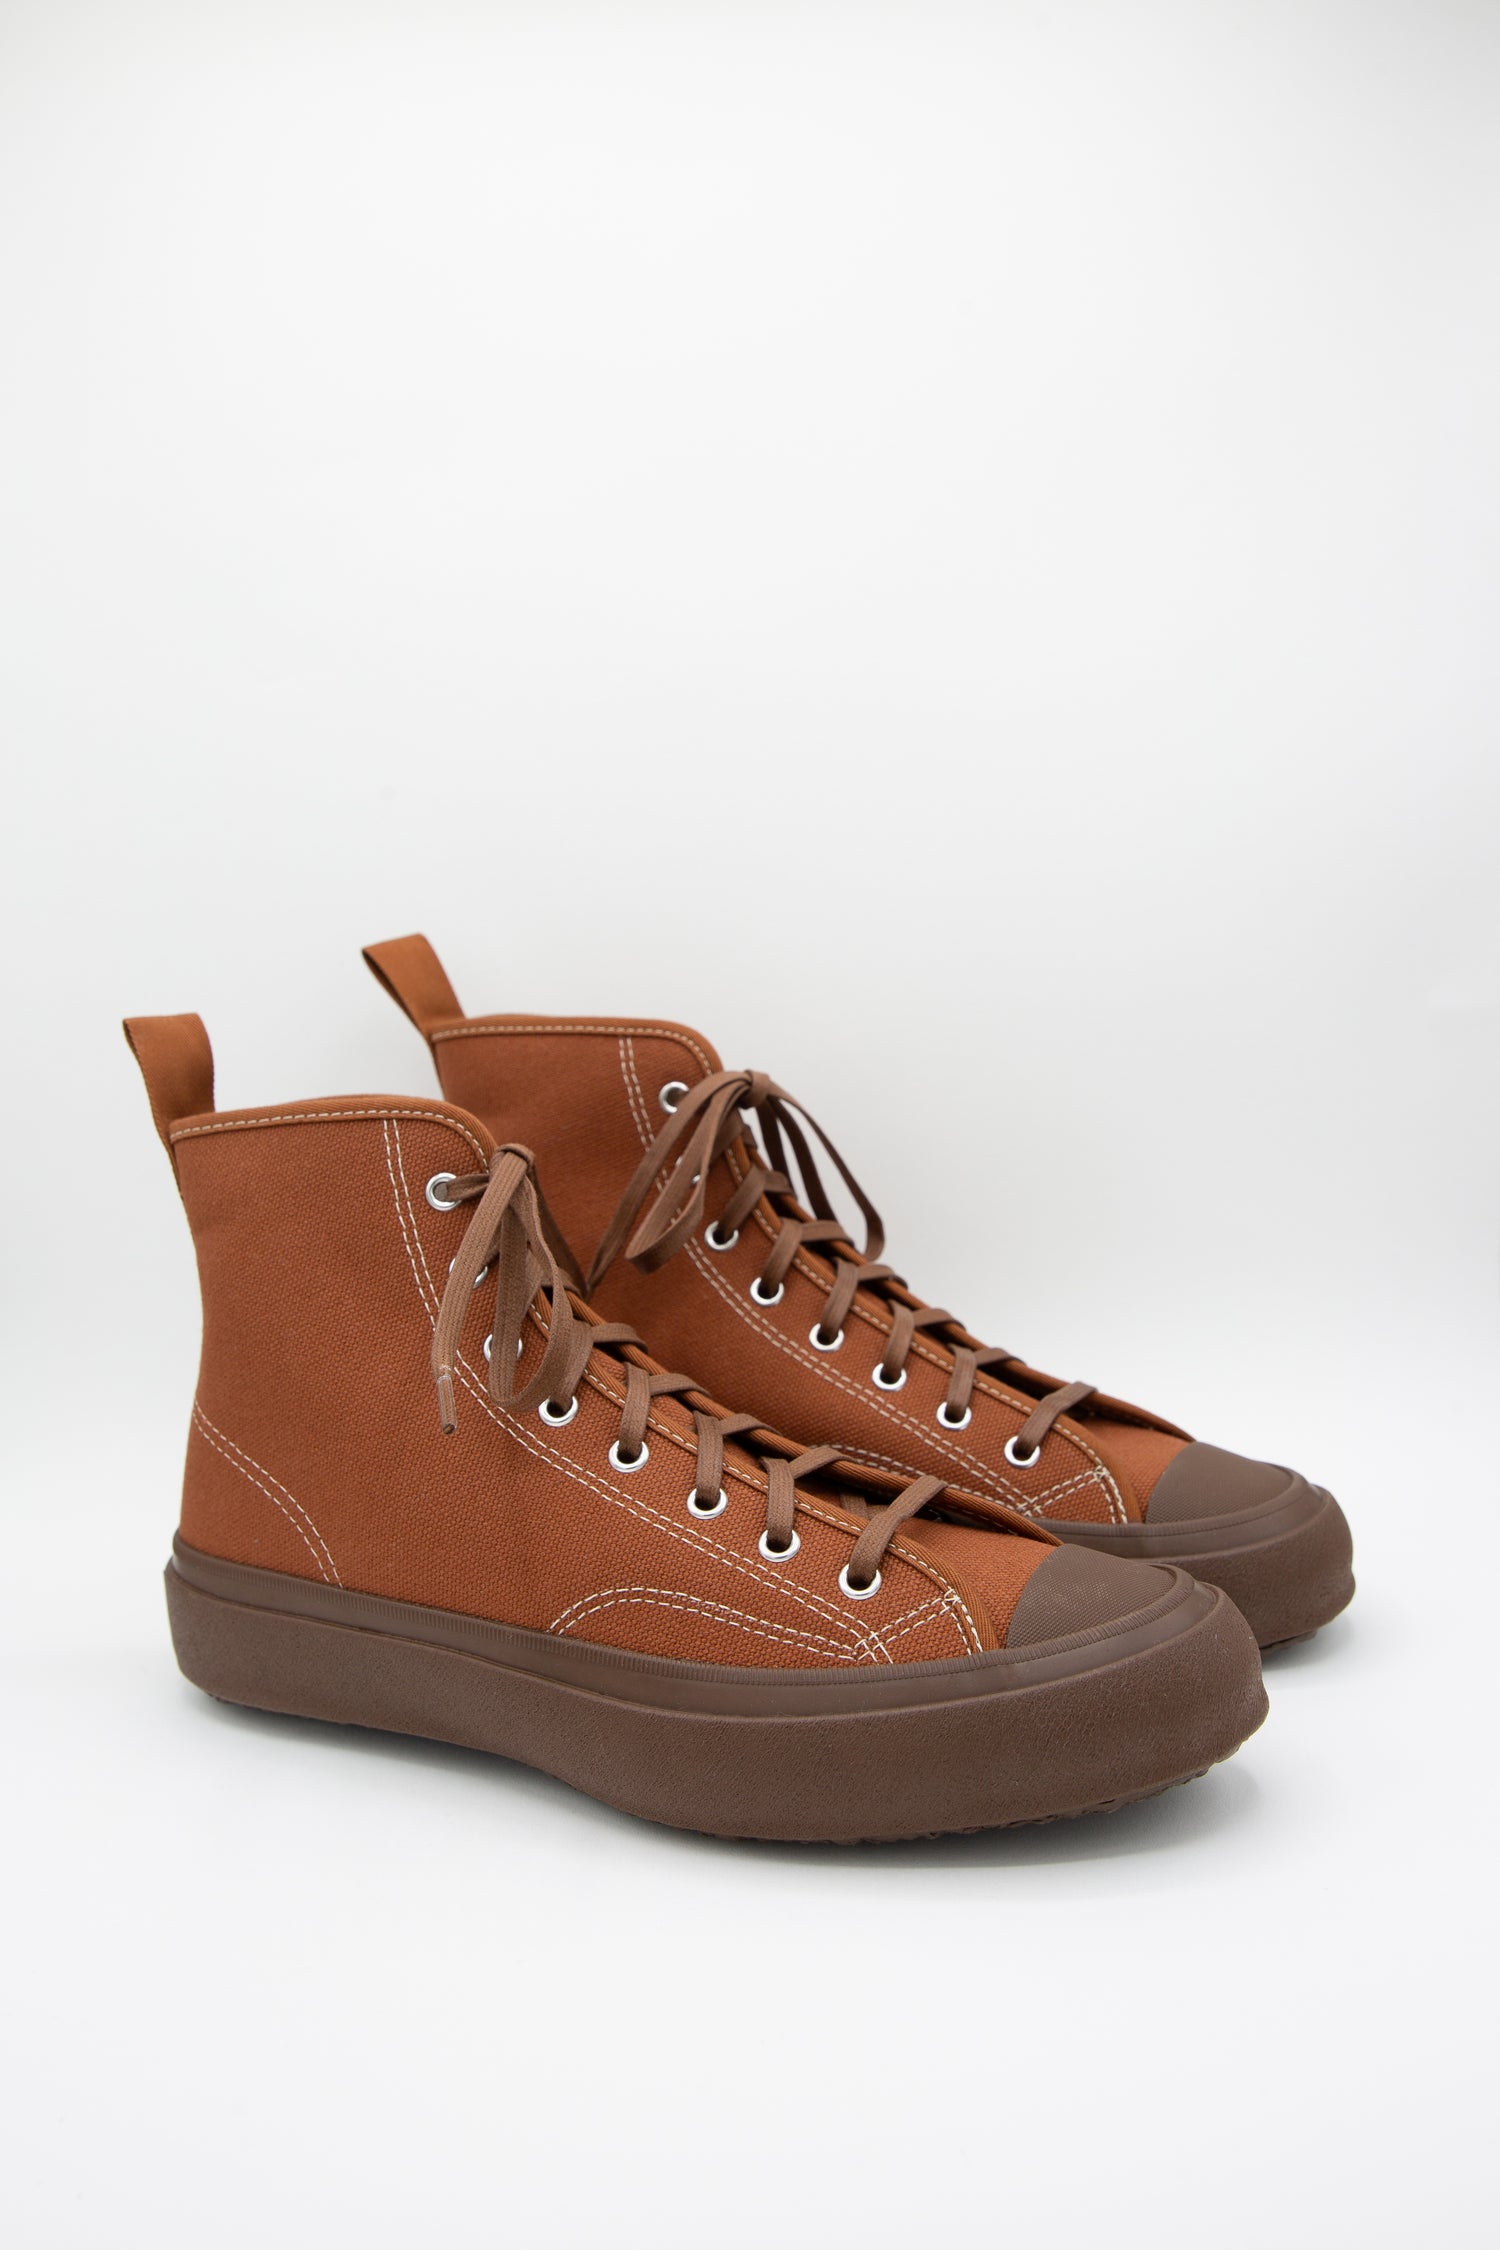 A pair of Moonstar Hibasket sneakers in Brown, with a rubber sole on a white background.